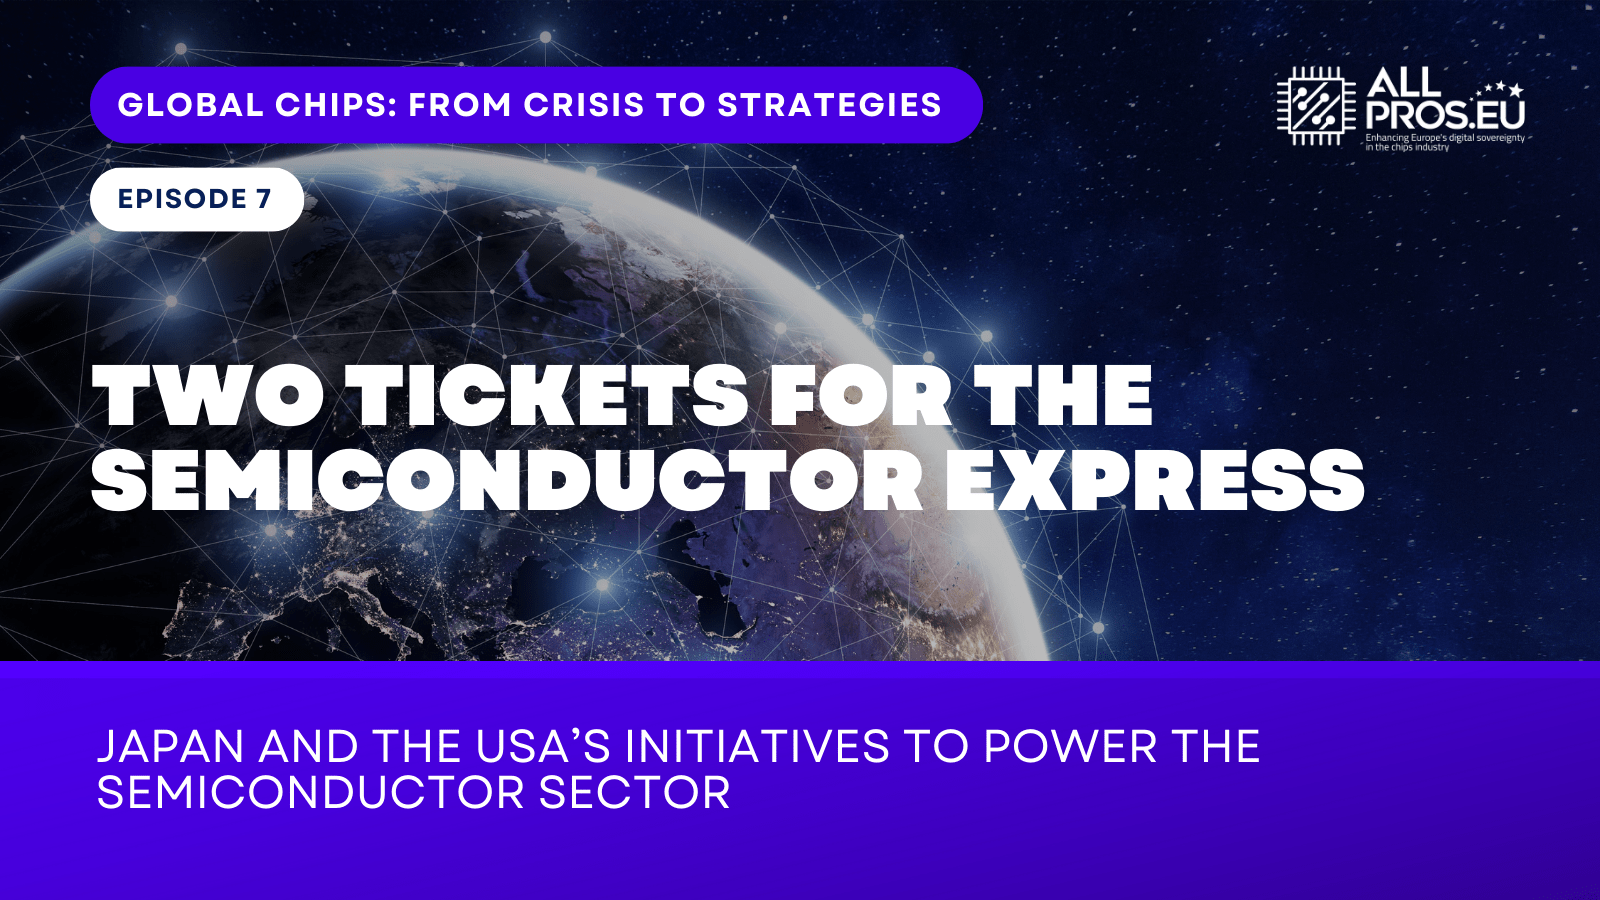 Two tickets for the Semiconductor Express: Japan and the USA’s initiatives to power the semiconductor sector